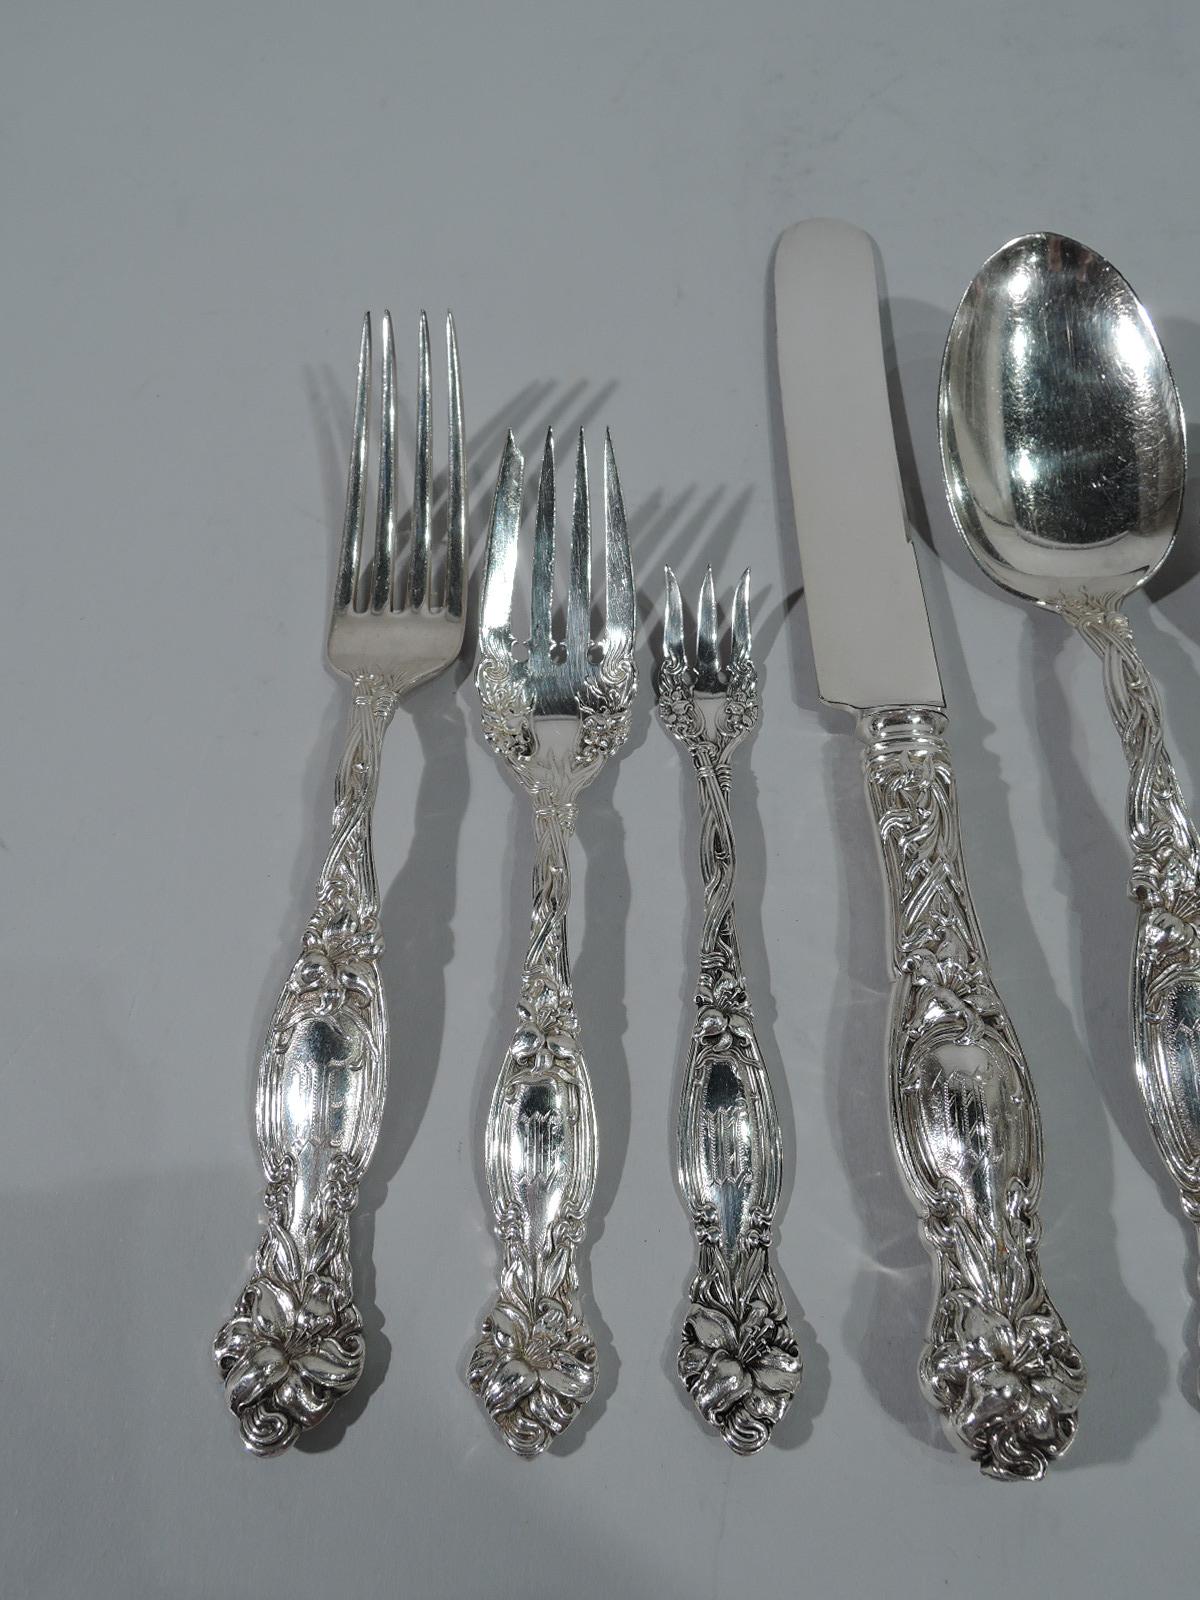 Antique sterling silver dinner service for 12 in Frontenac pattern. Made by International in Meriden, Conn.

This service comprises 110 pieces (all dimensions in inches): Forks: 12 dinner forks (7 1/2), 12 salad forks, (6 3/8), and 12 seafood